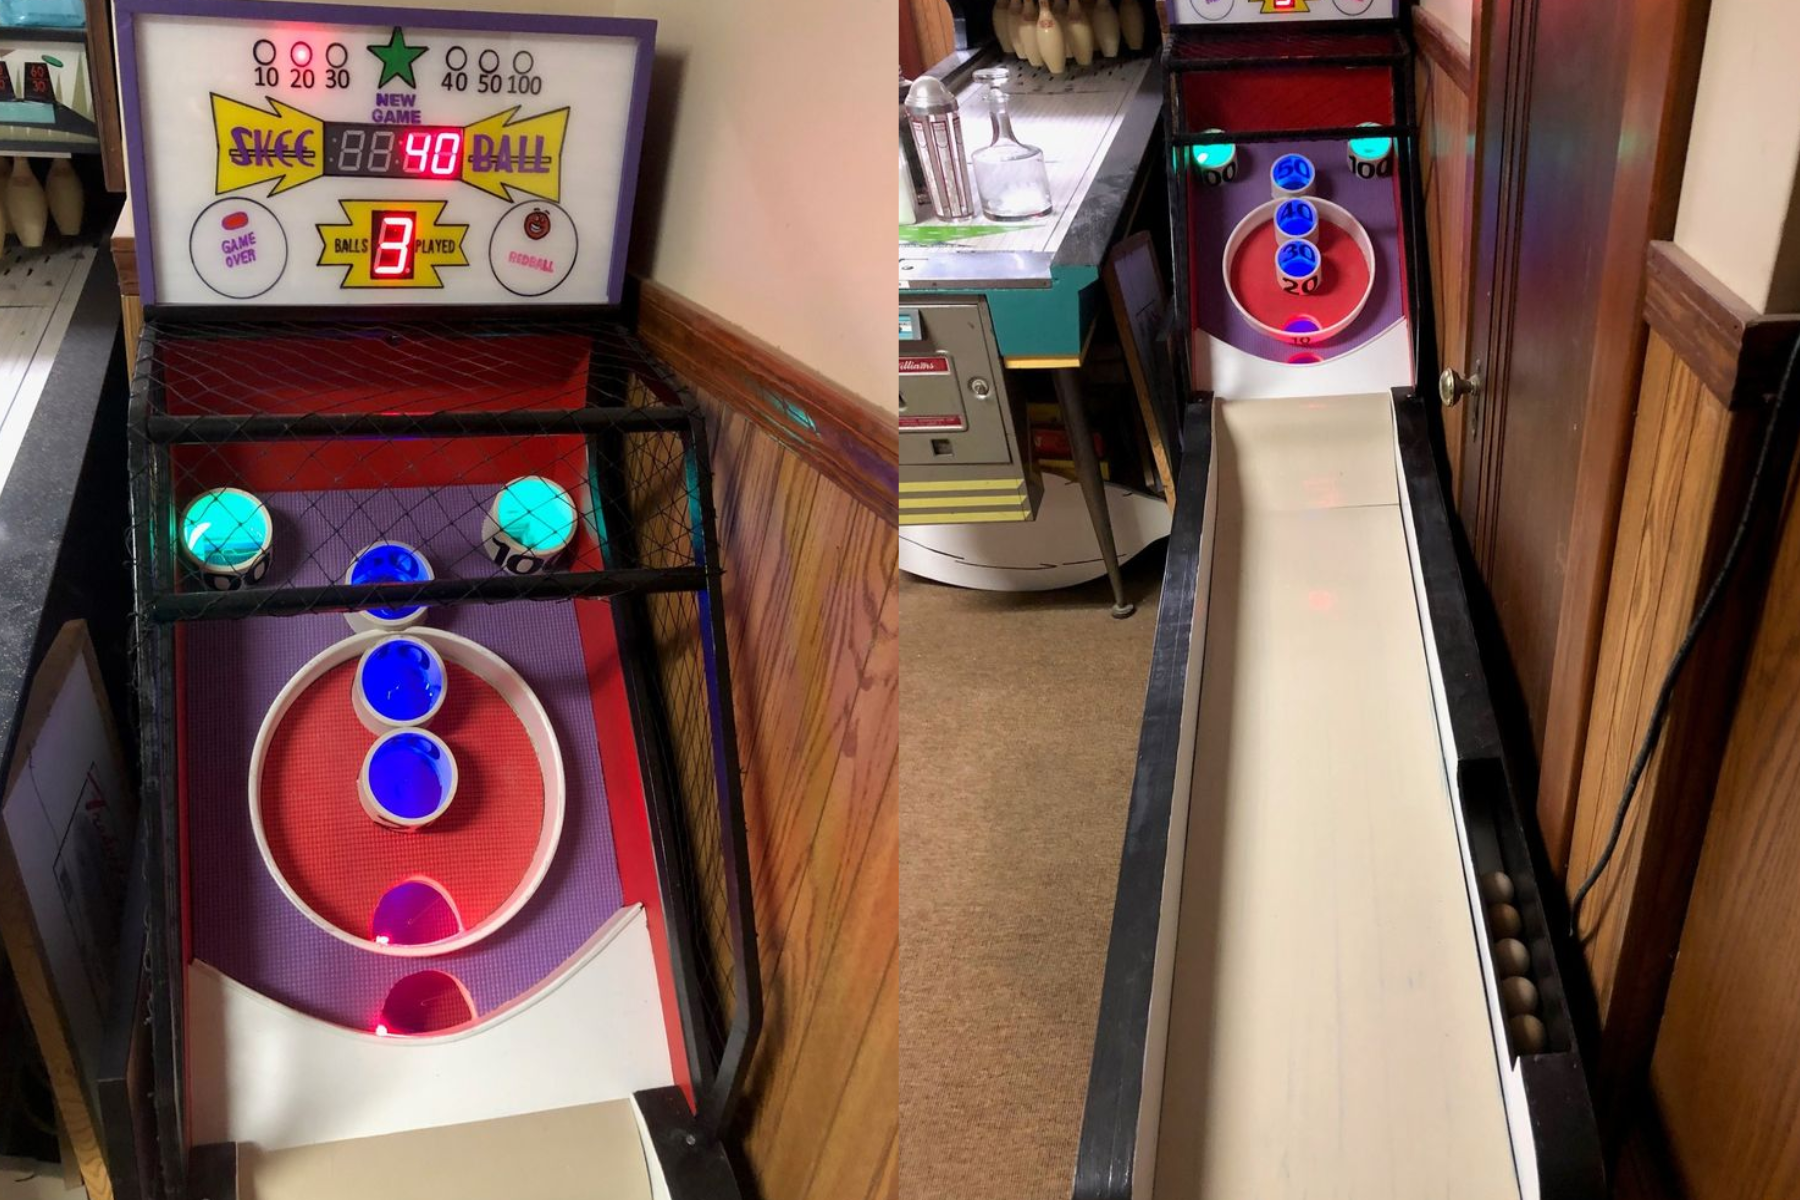 Two shots of the scoring system of a skee ball machine